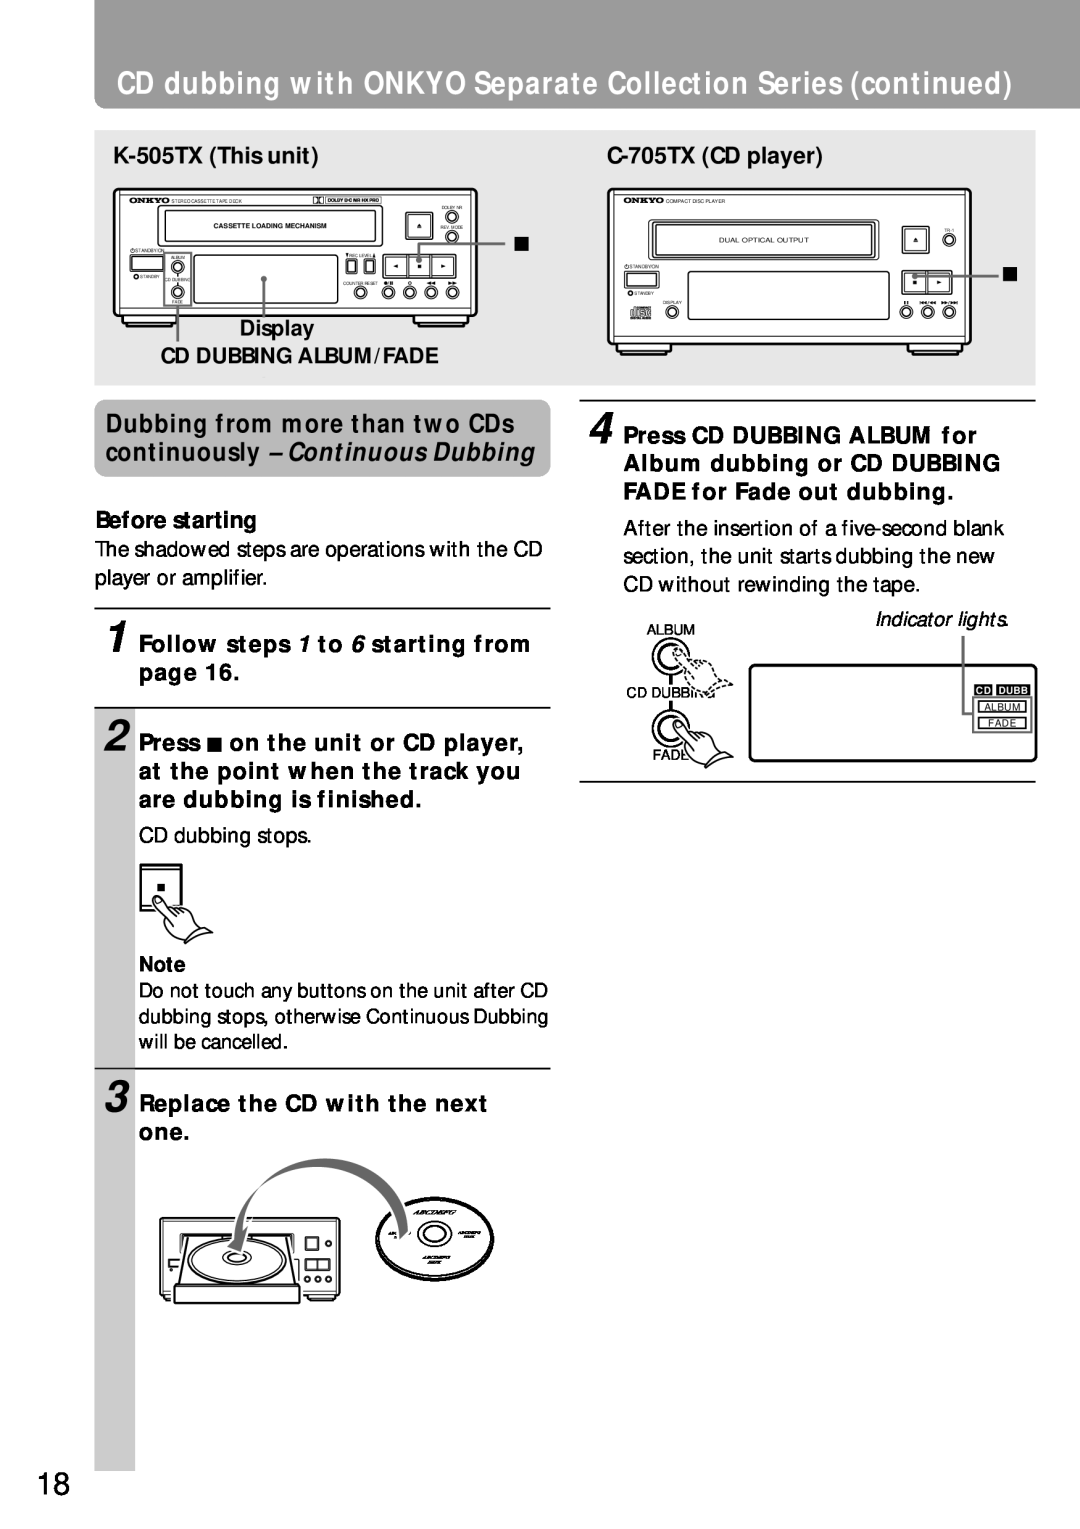 Onkyo K-505TXThis unit, C-705TXCD player, Before starting, Follow steps 1 to 6 starting from page, Indicator lights 